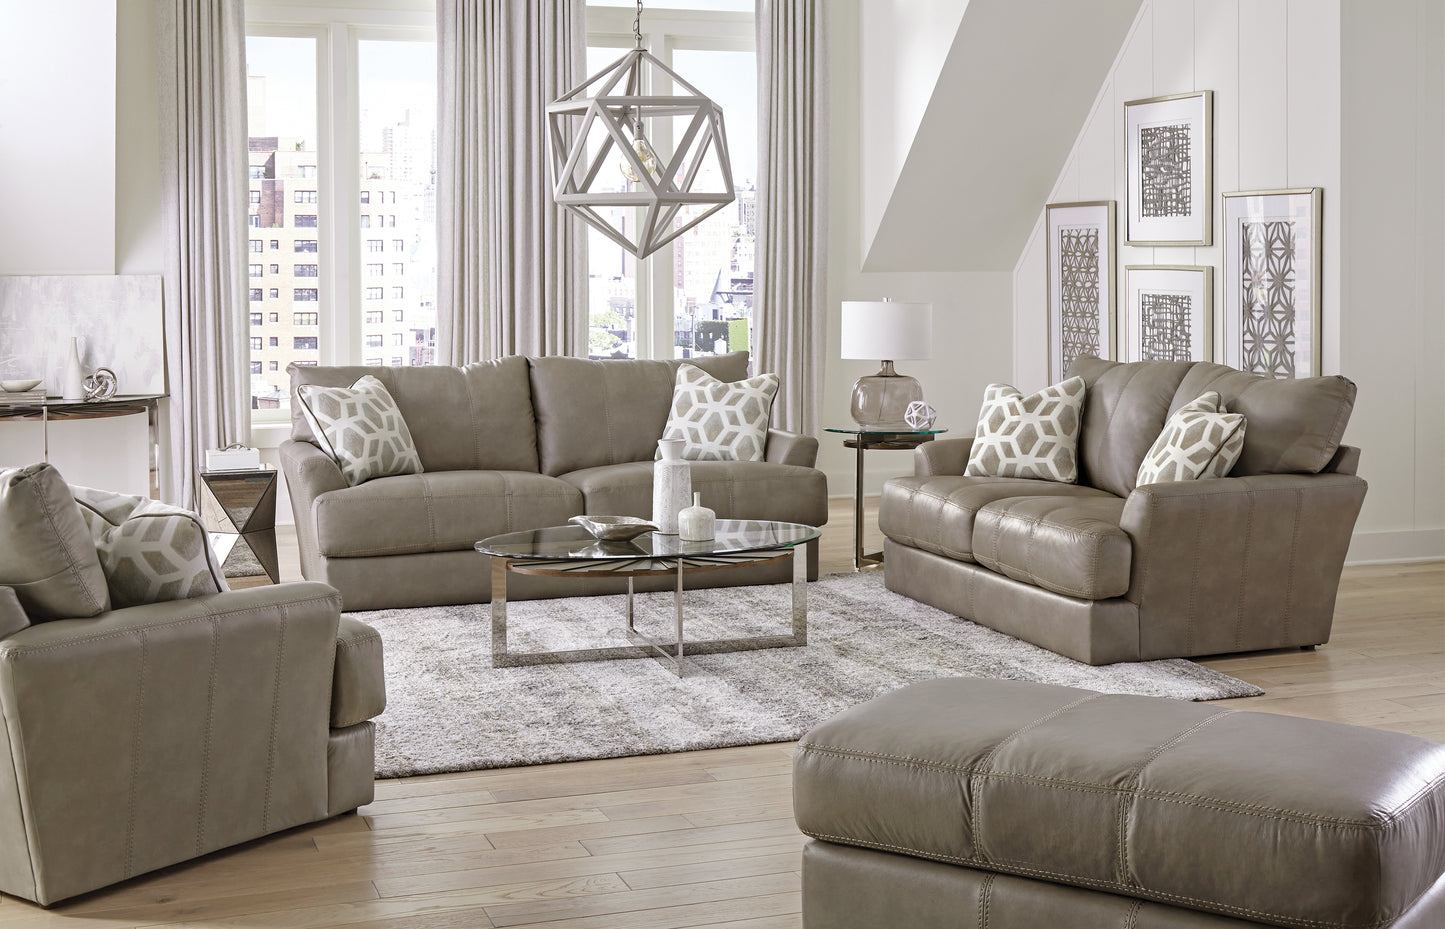 Patro Sofa, Loveseat, Chair & Ottoman Available in Chocolate & Putty